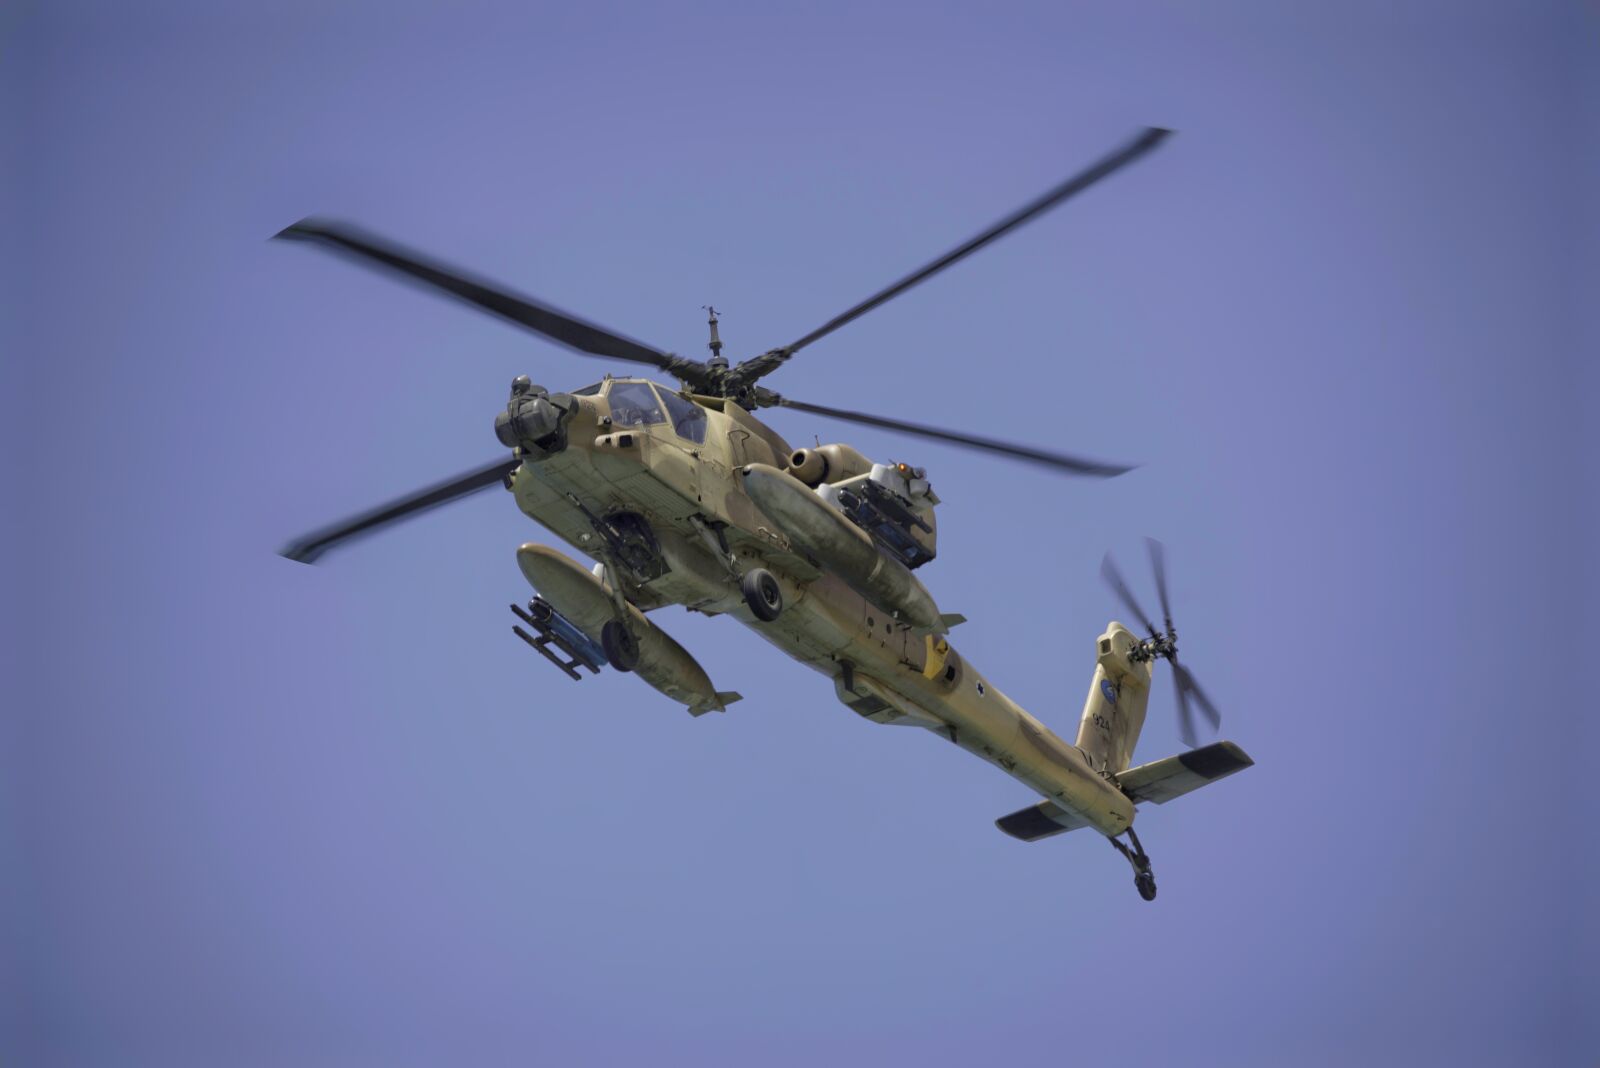 Nikon D800 sample photo. Military, aircraft, helicopter photography